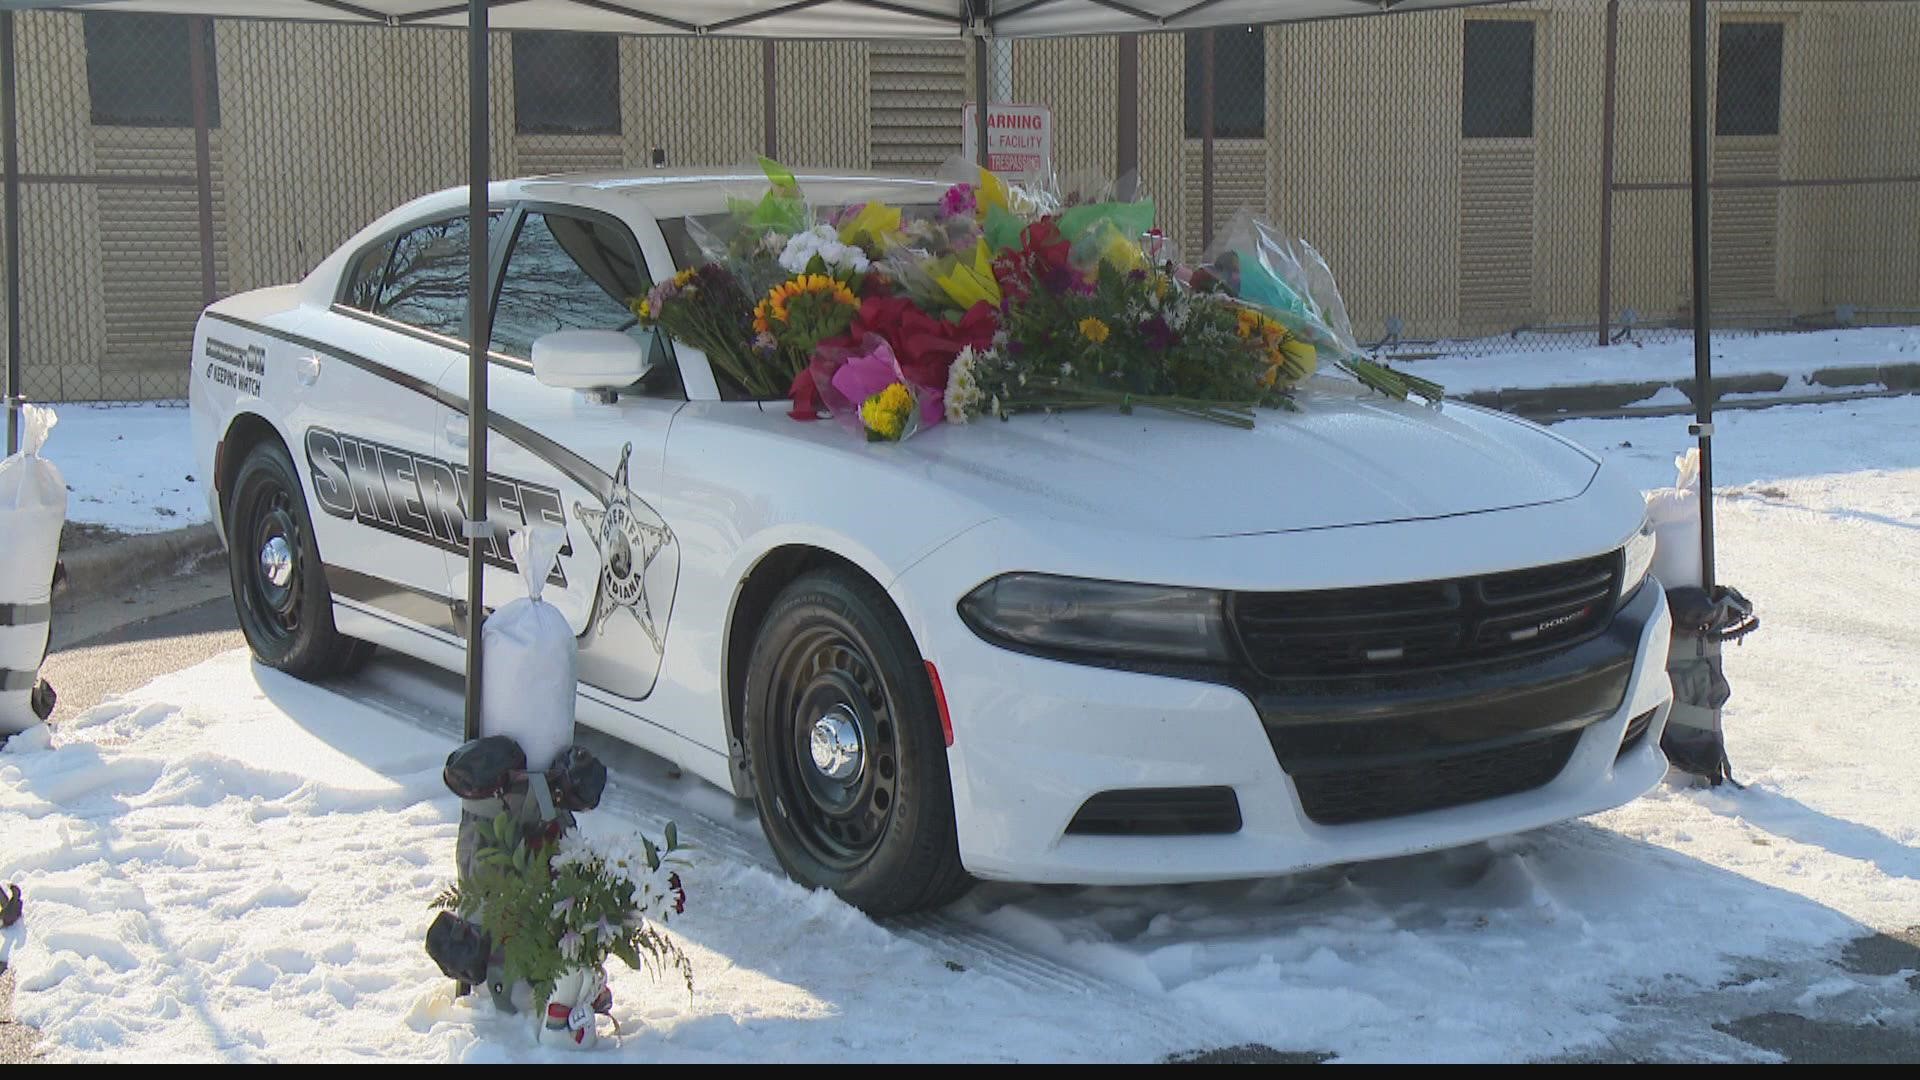 Community leaders in Delphi are asking for prayers as they mourn the loss of two Carroll County deputies who died in a crash over the weekend.